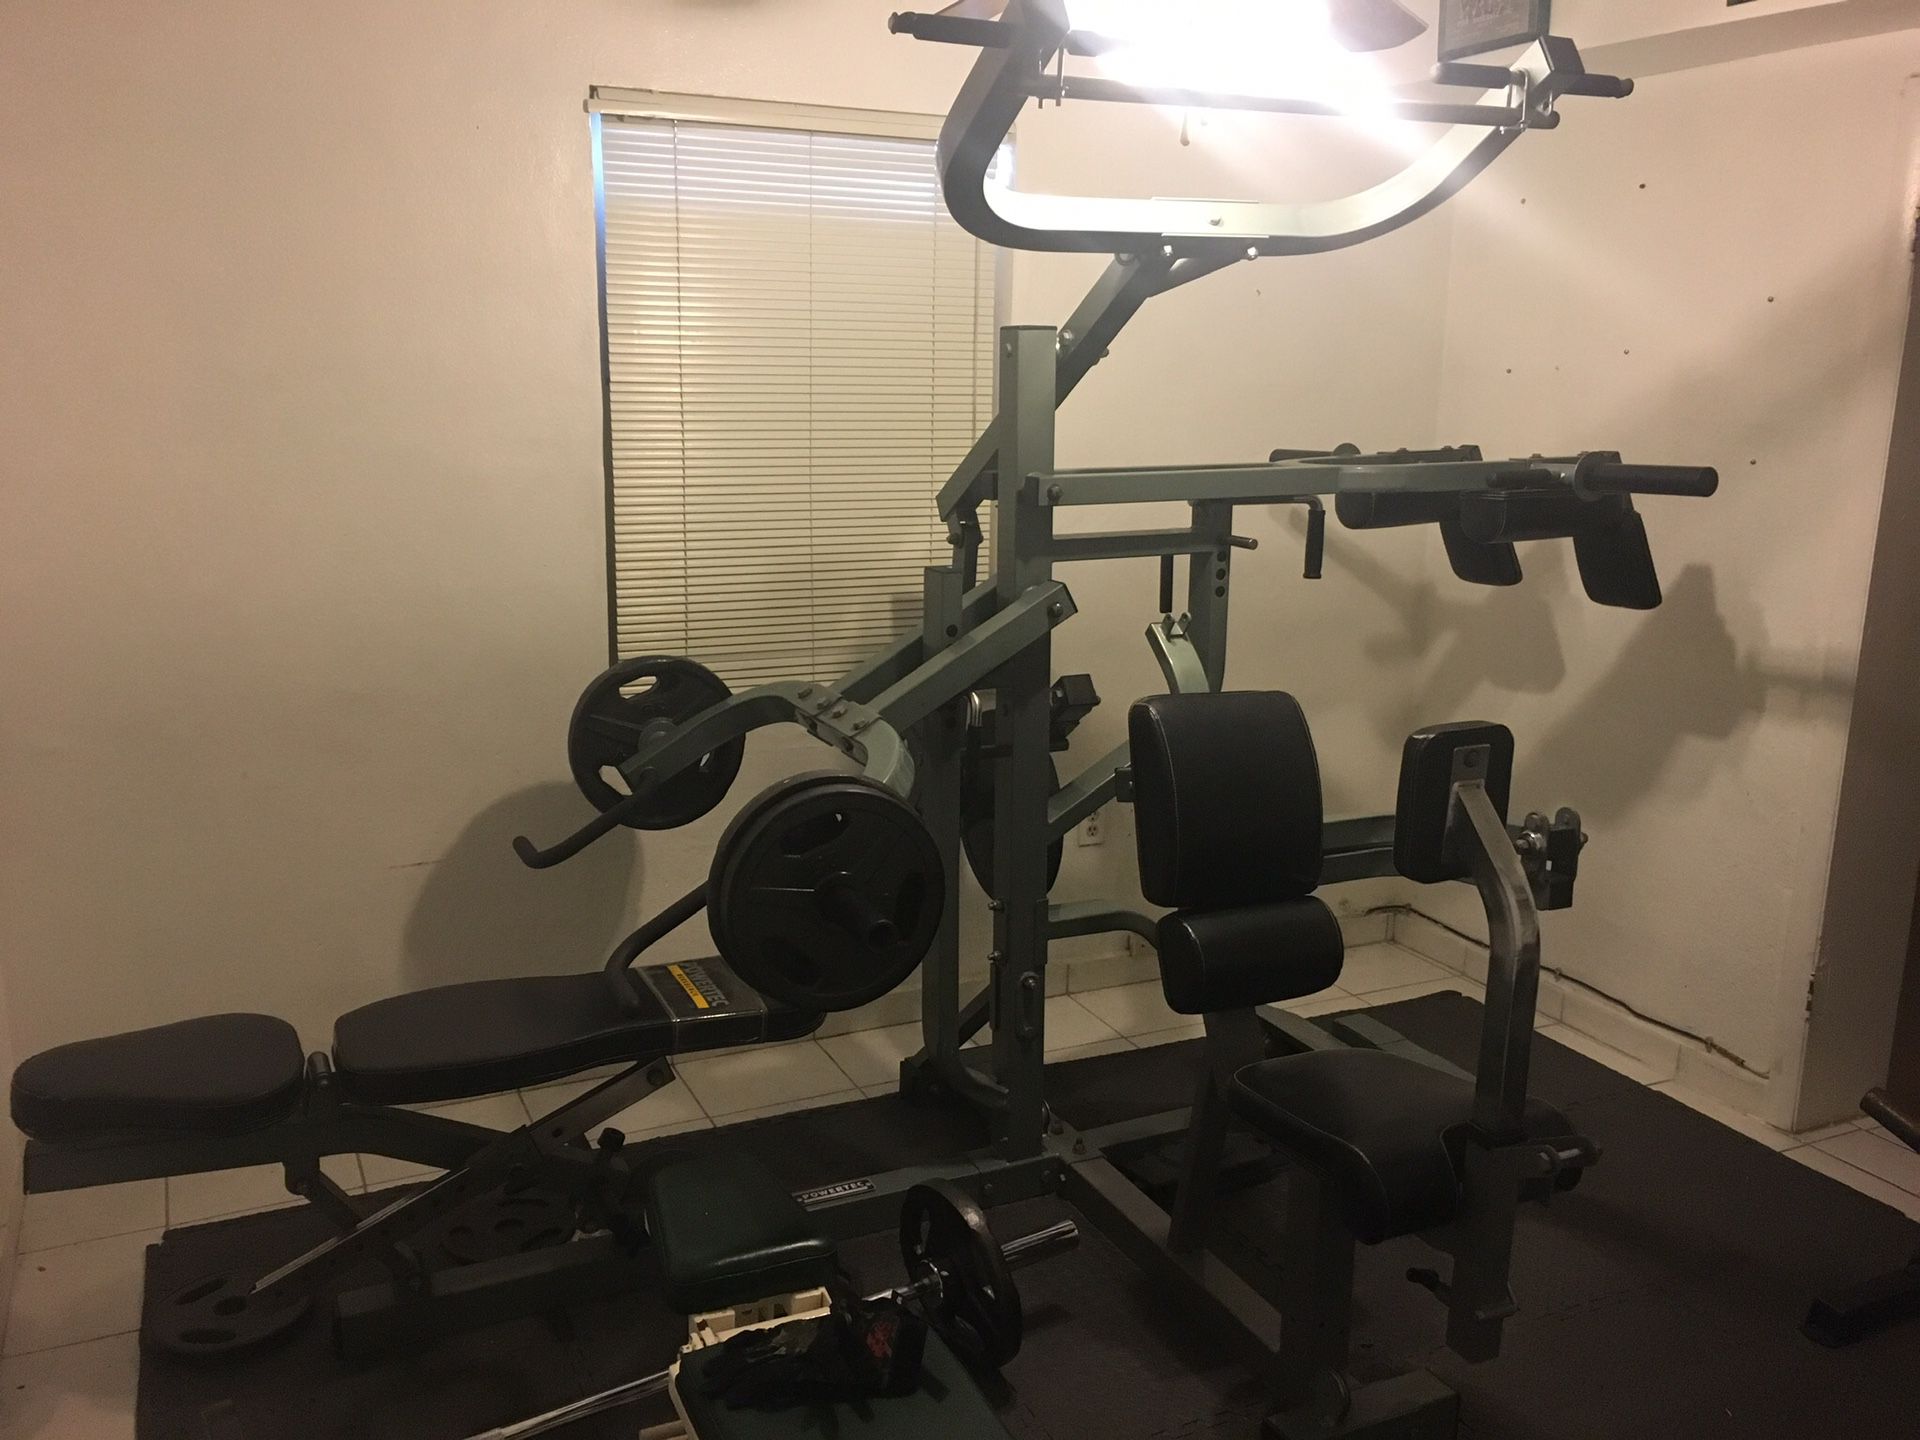 Powertec home gym in very good condition.